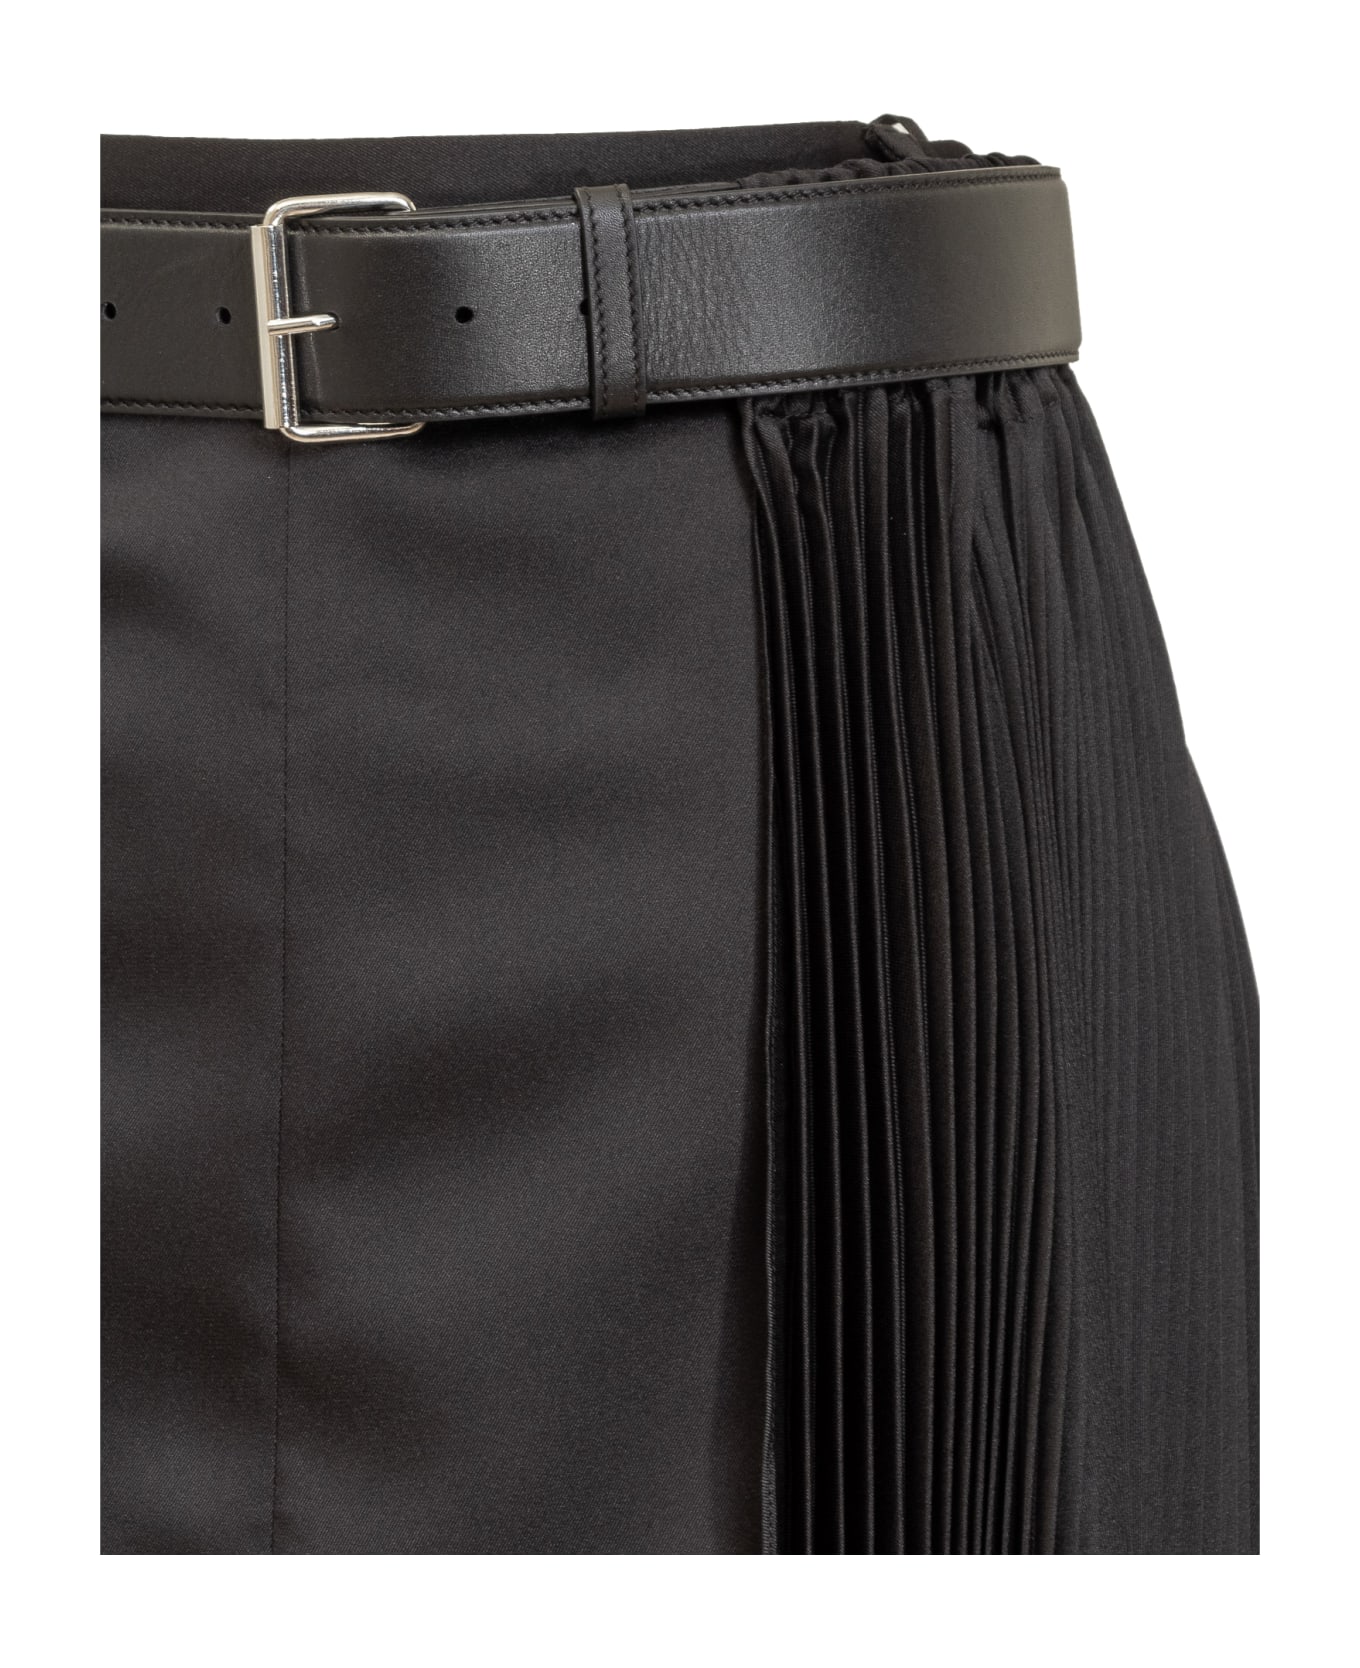 Peter Do Belted Pleated Skirt - BLACK